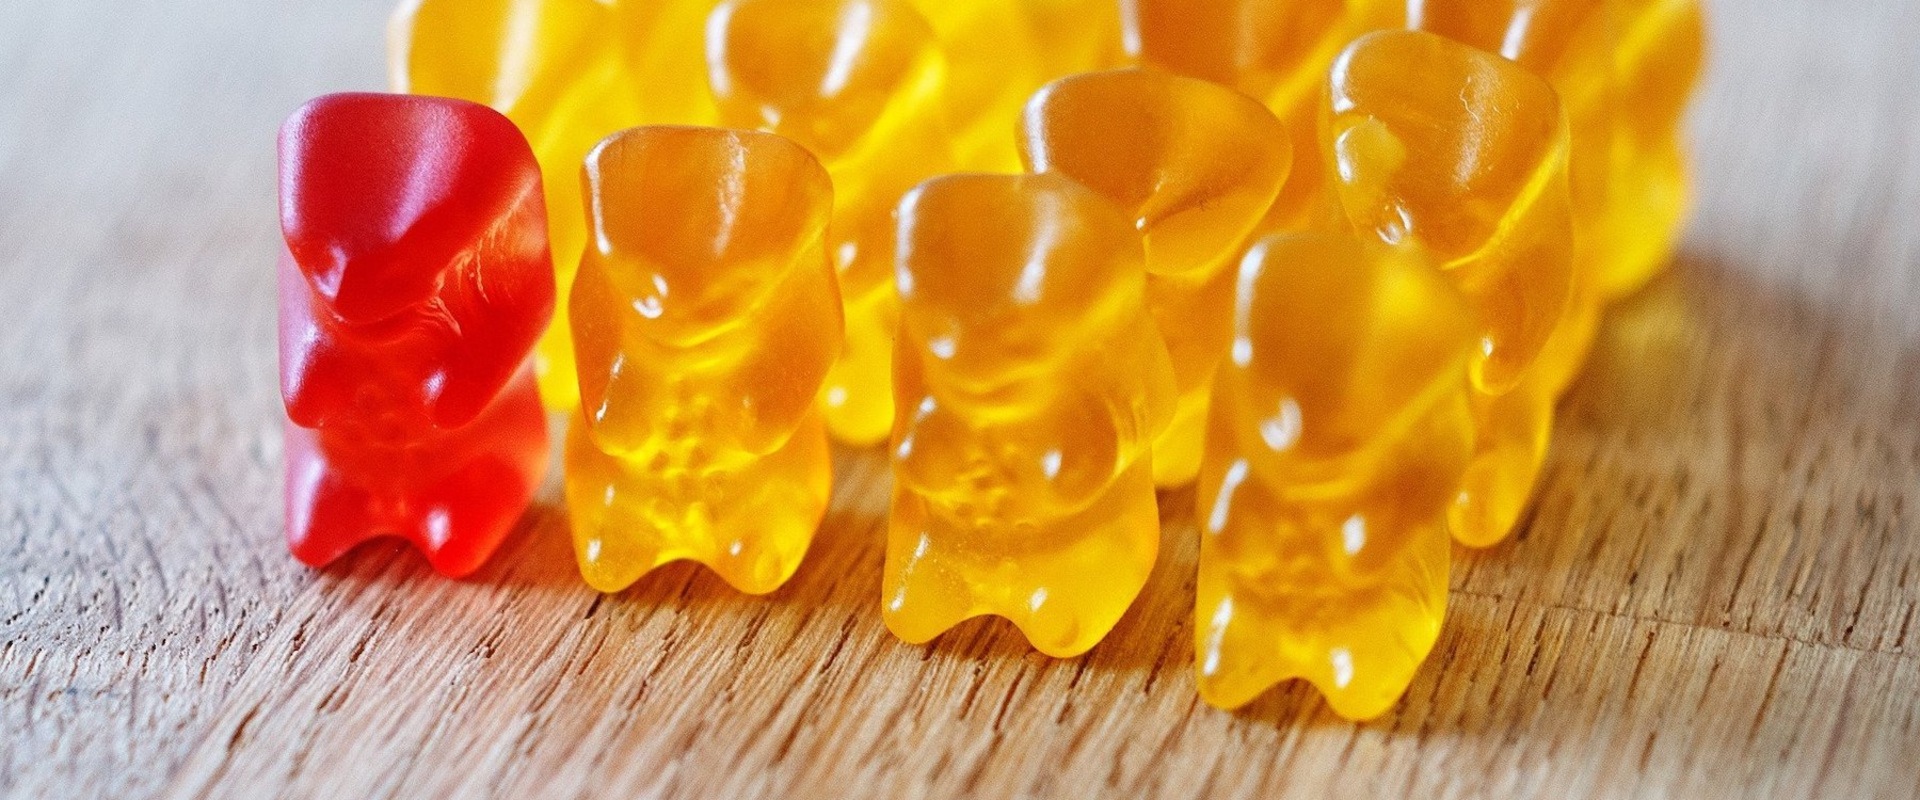 What ingredients are in delta 9 gummies?